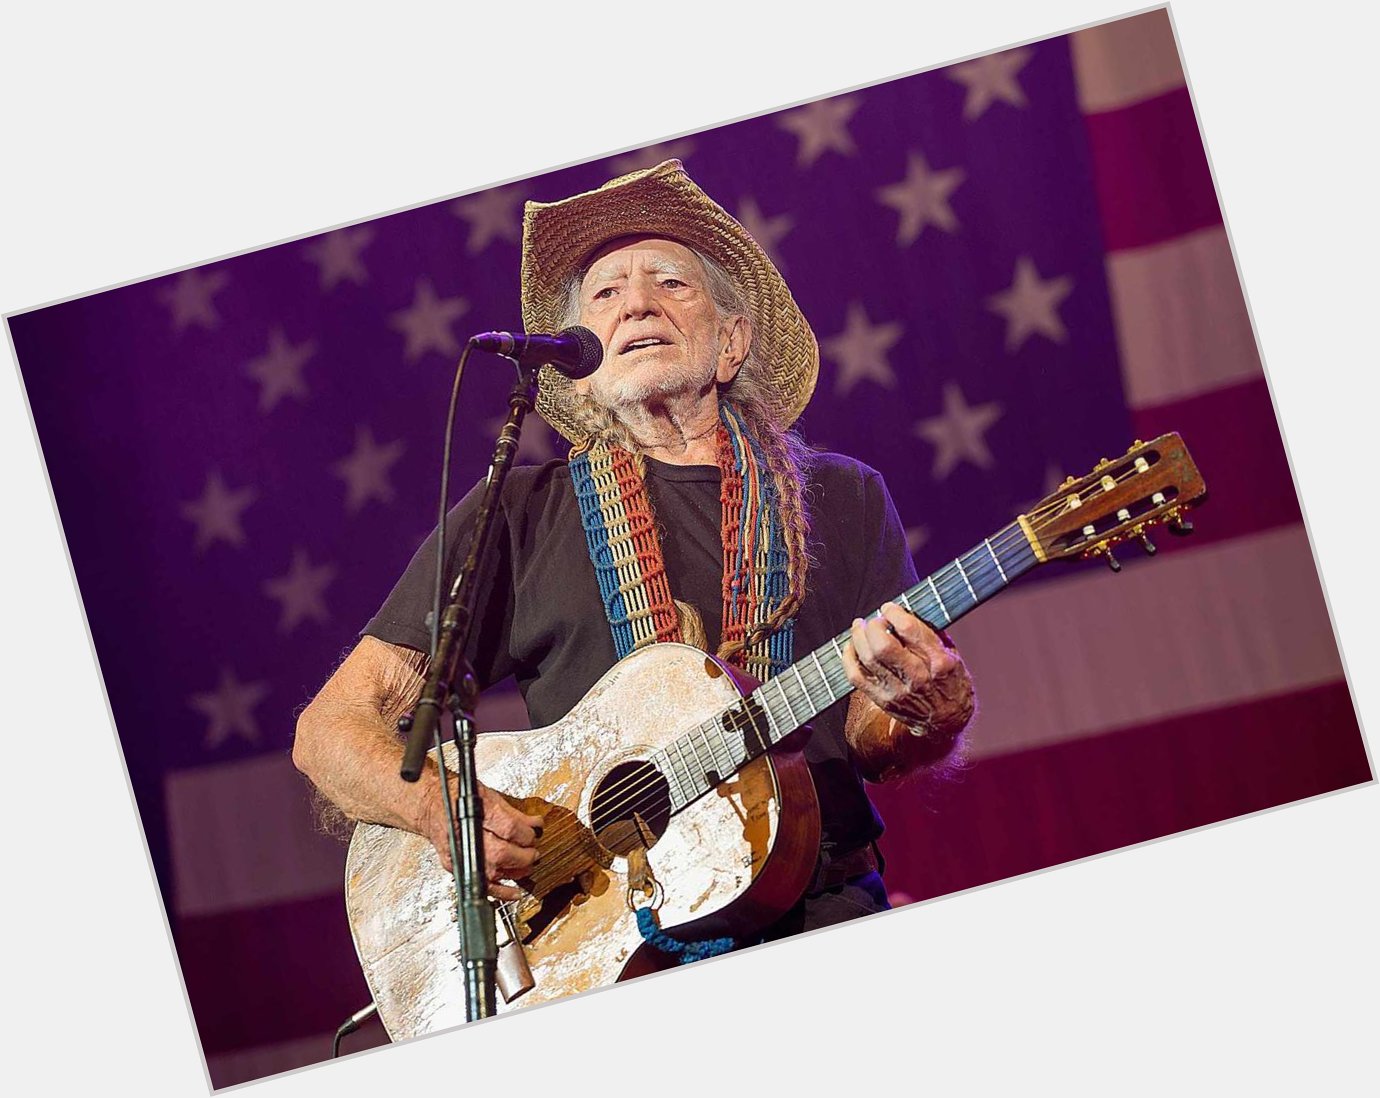 Happy Birthday to an American icon the one and only Willie Nelson!  